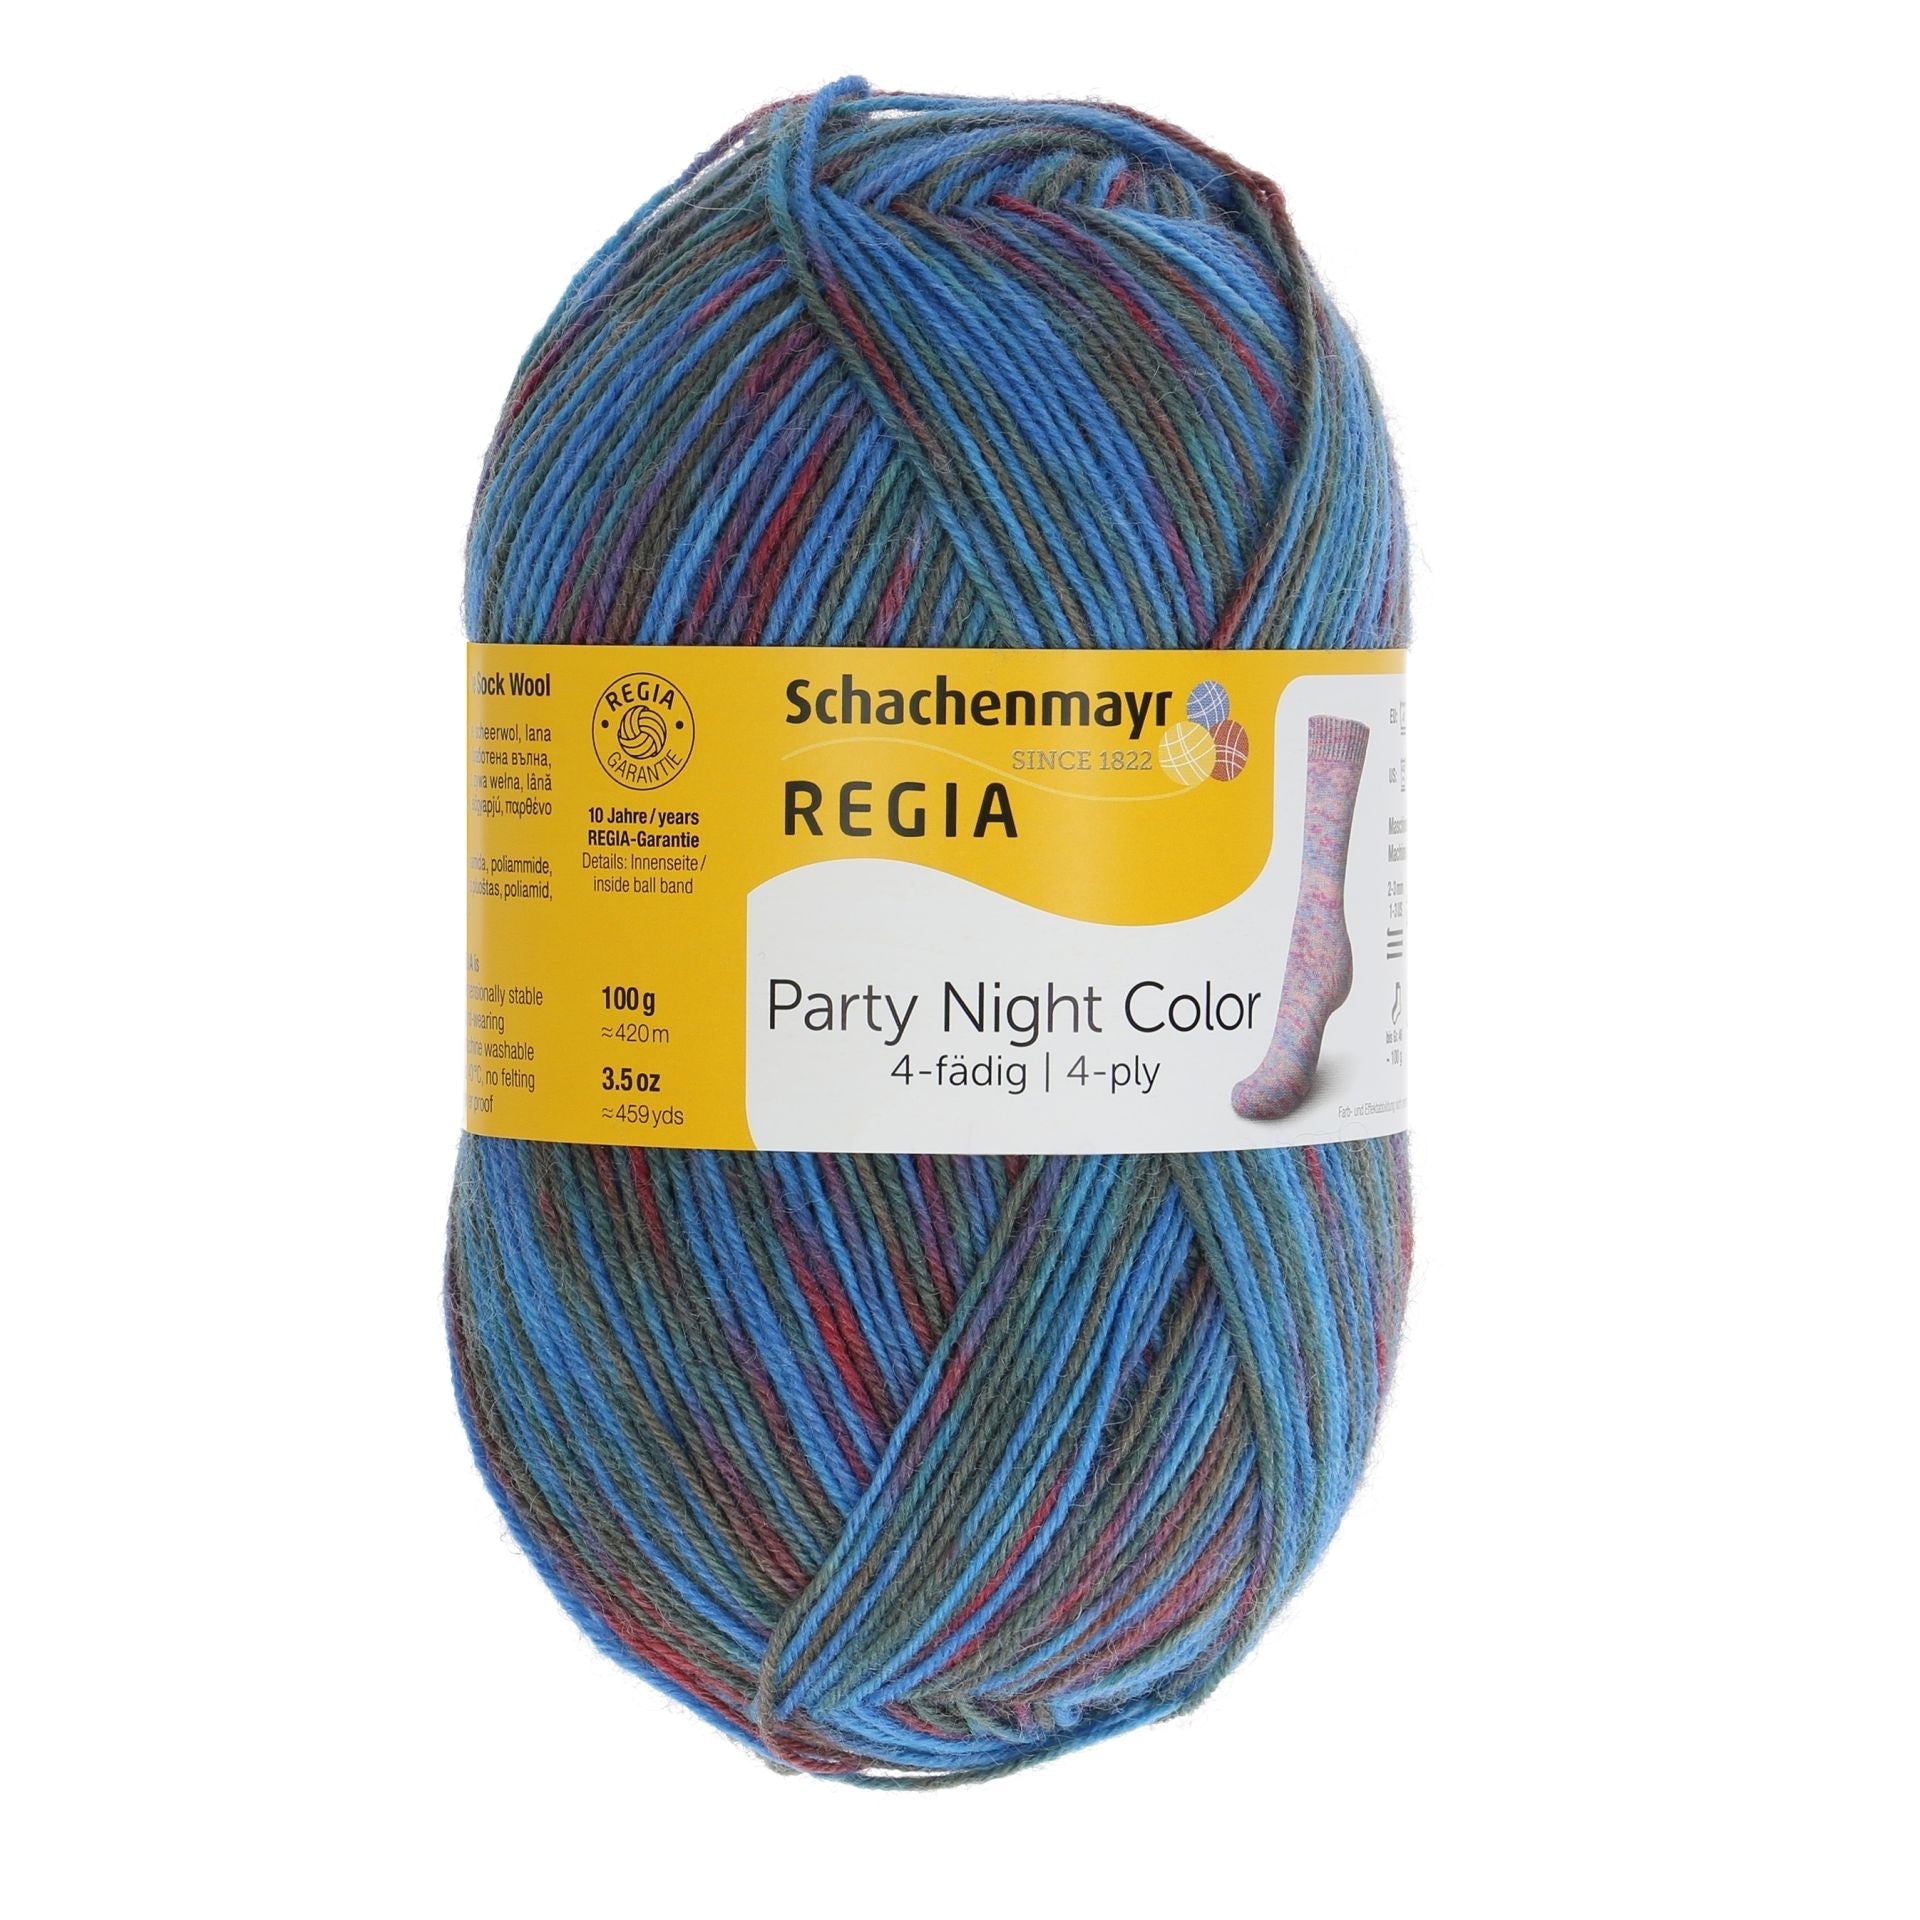 Regia Party Night Color 4-Ply 100g - 1132 Fireworks